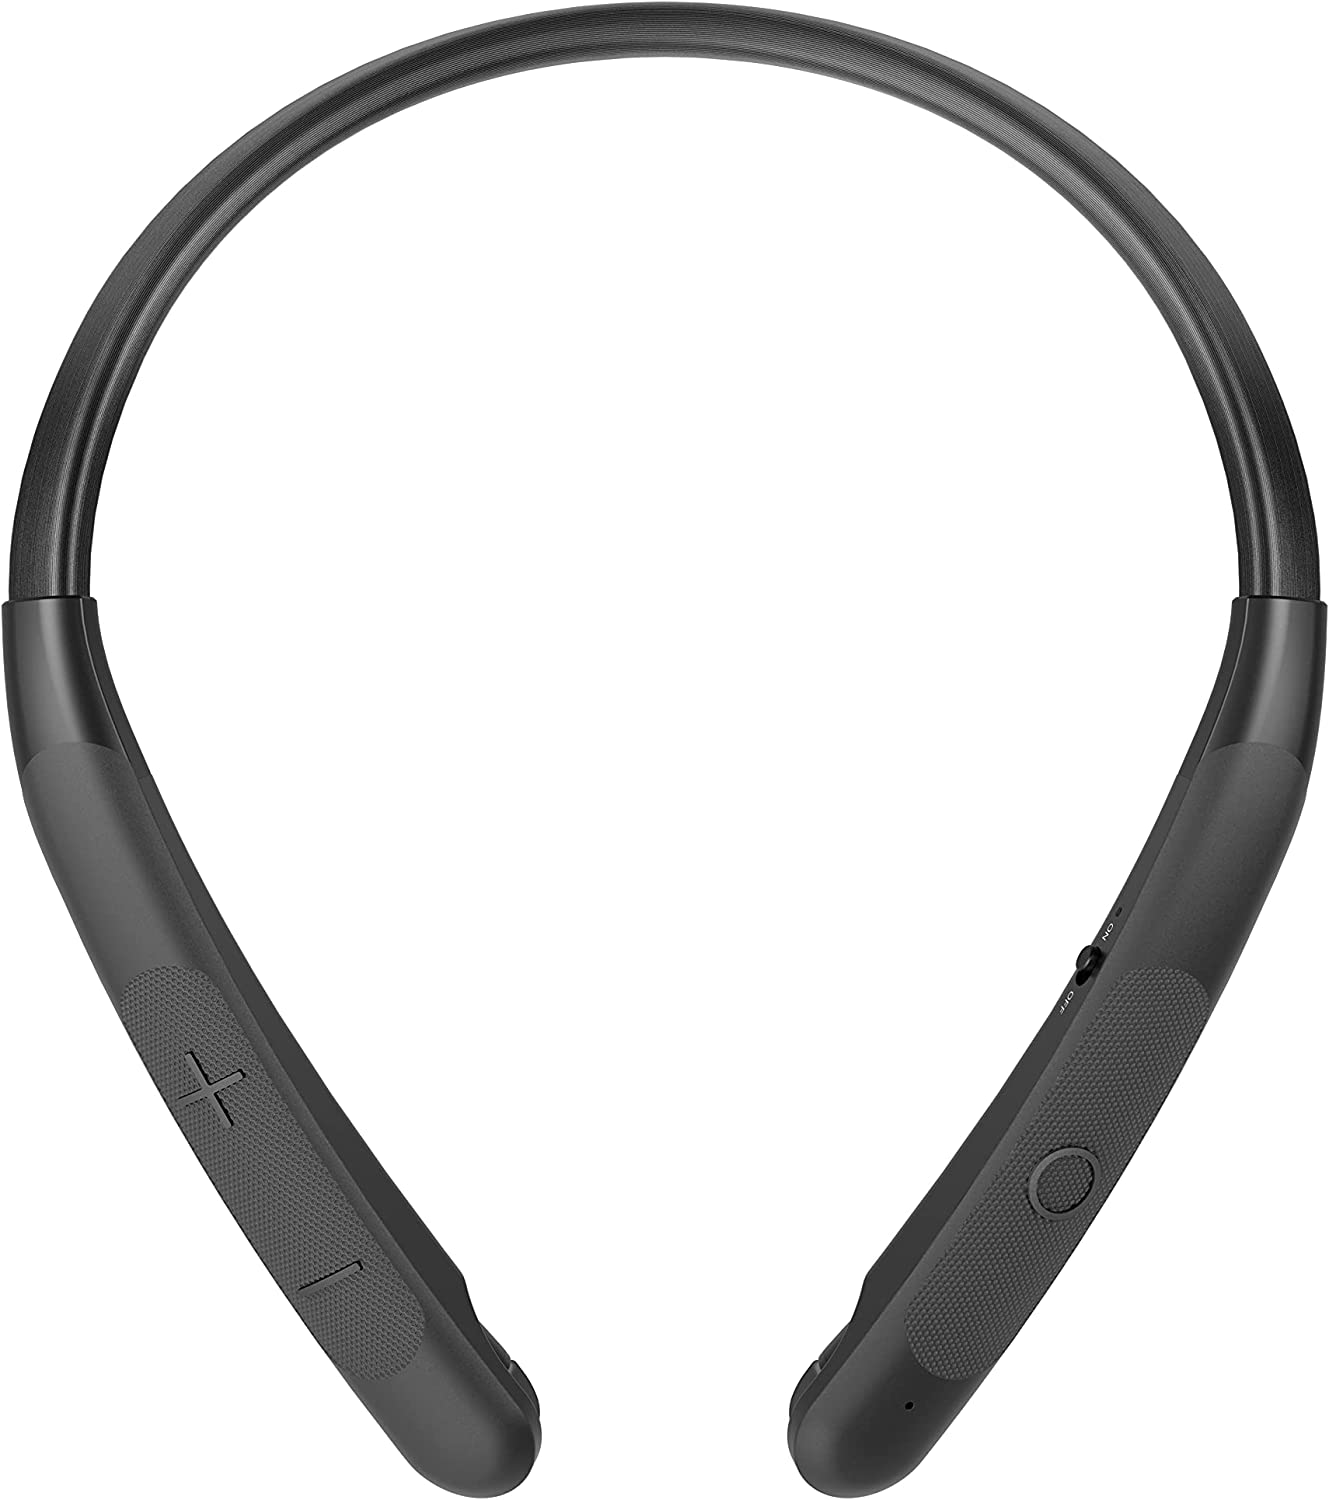 LG TONE NP3 Wireless Stereo Headset with Retractable Earbuds, Black (Refurbished)